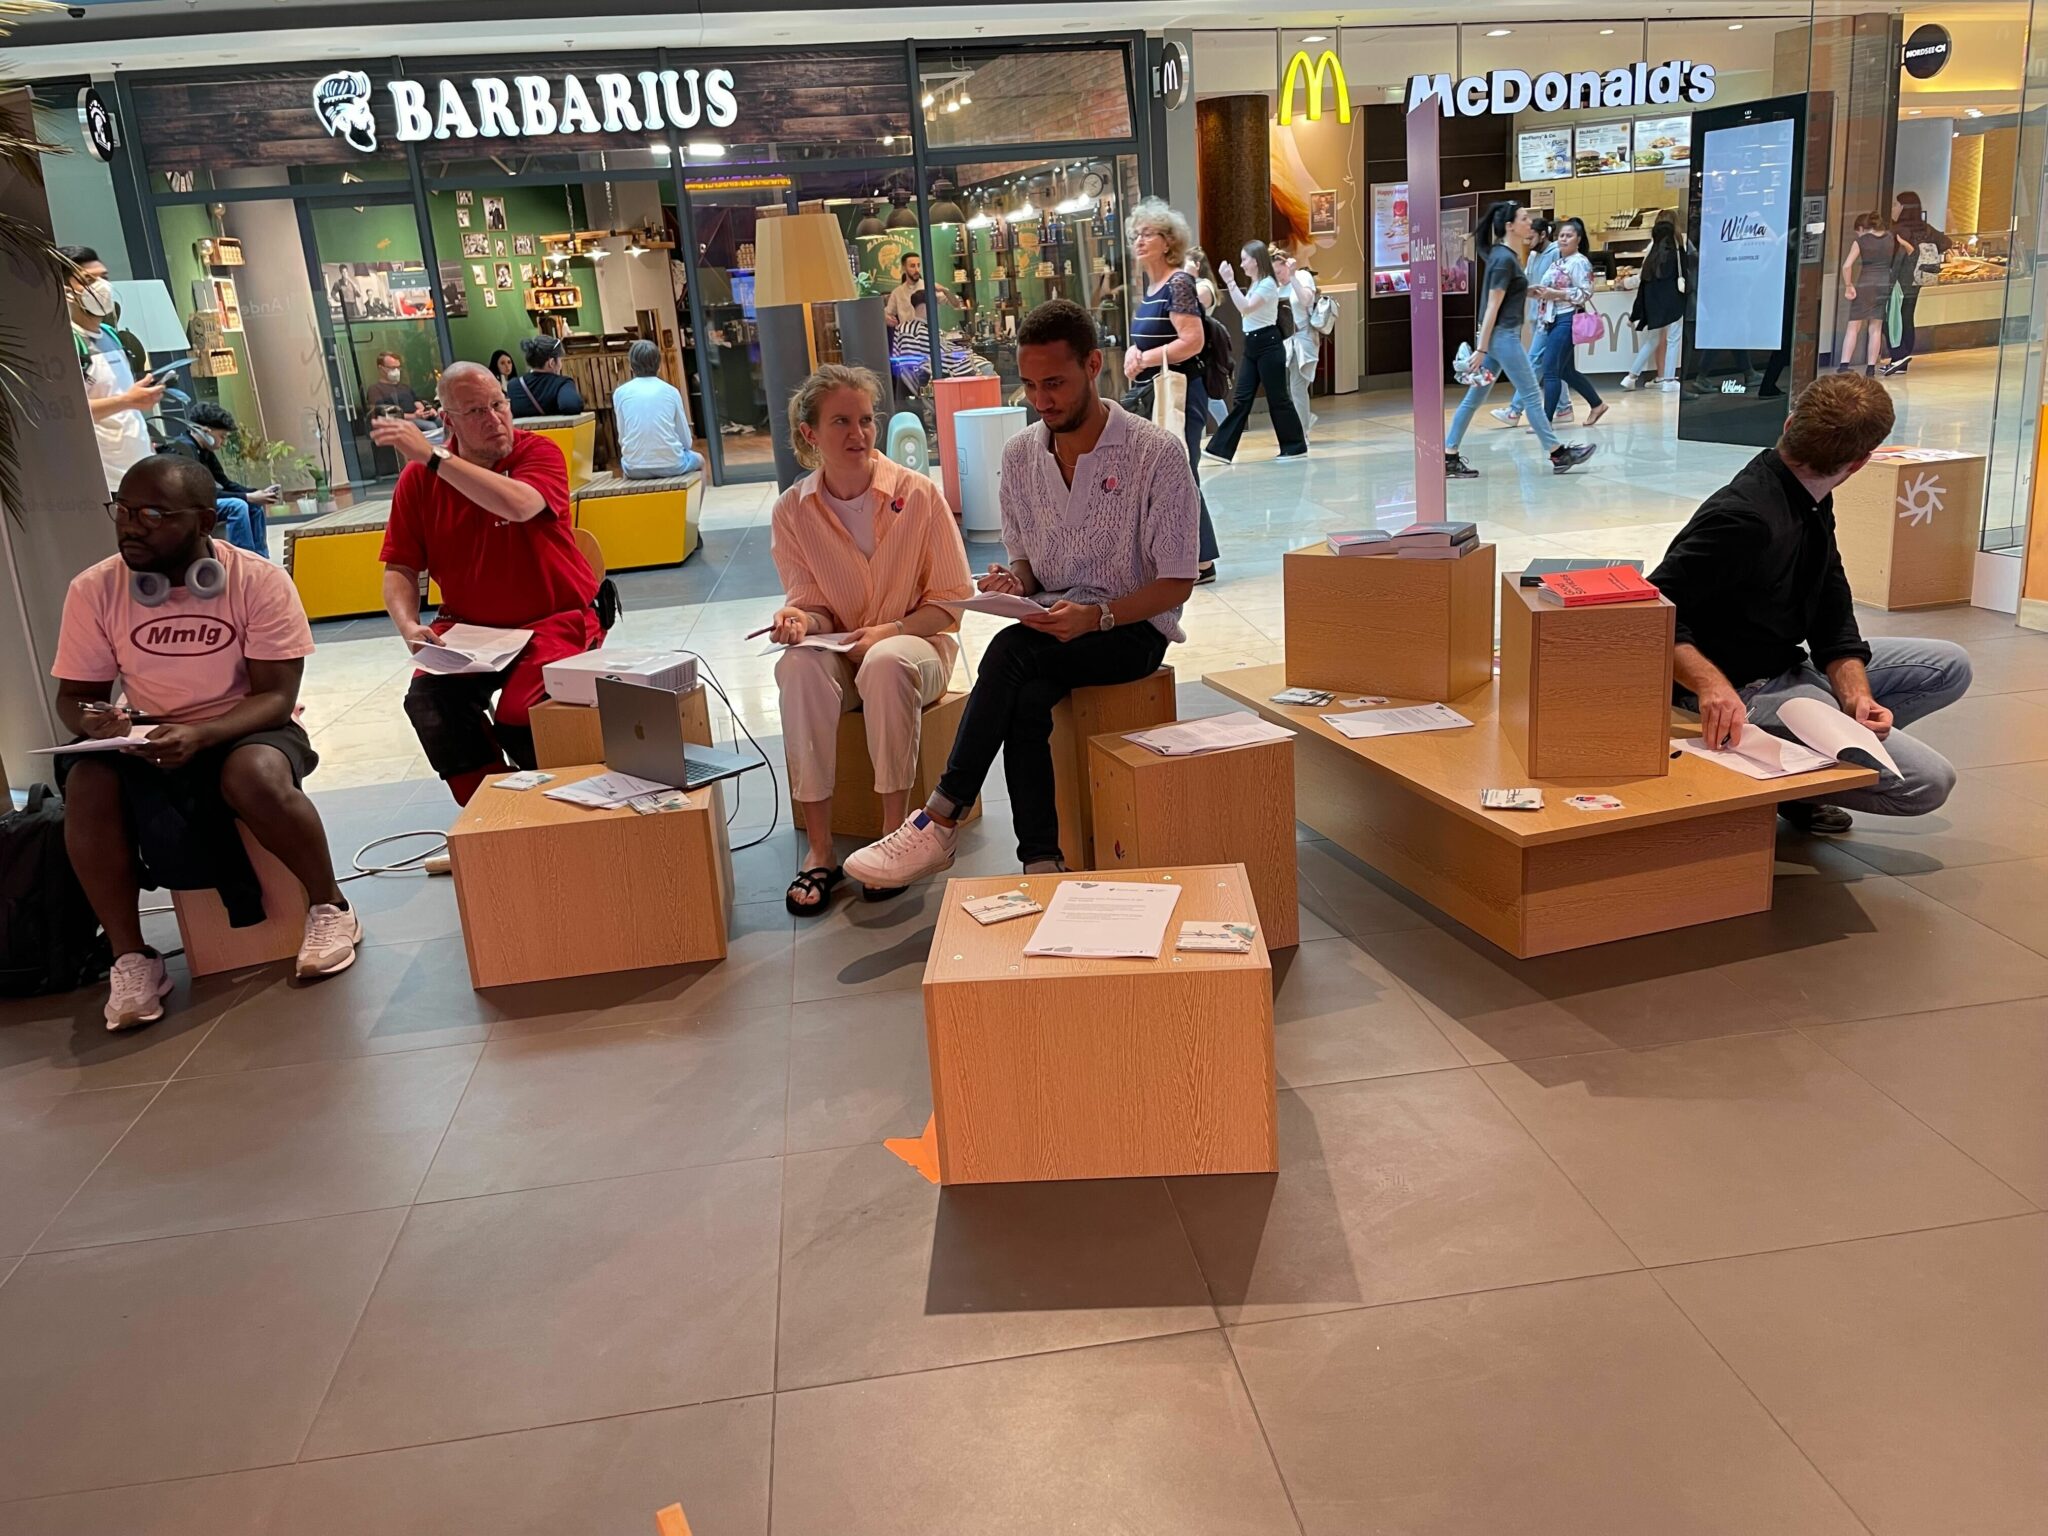 5 people sitting in the Mall, reading and talking to each other. There are stores and people walking by in the background.